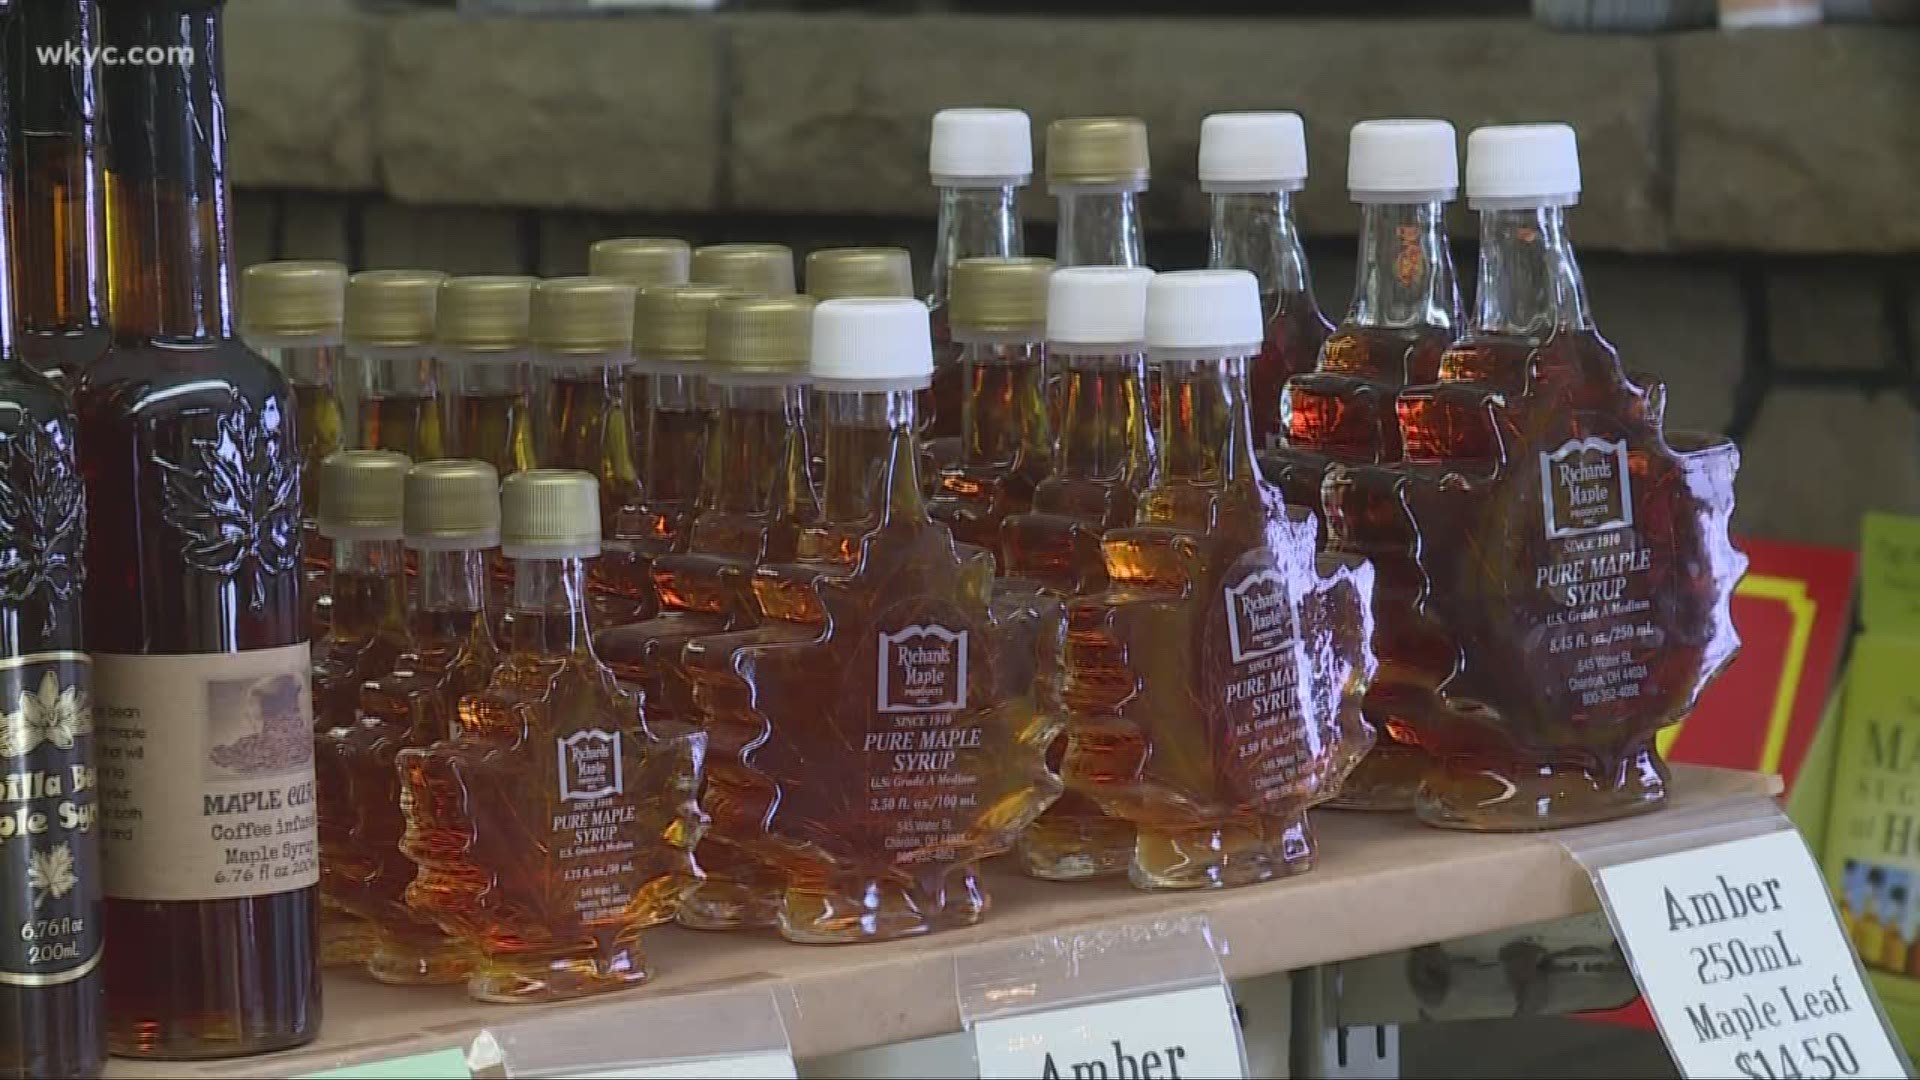 The magic elixir is for more than just pancakes. Carl Bachtel reports.